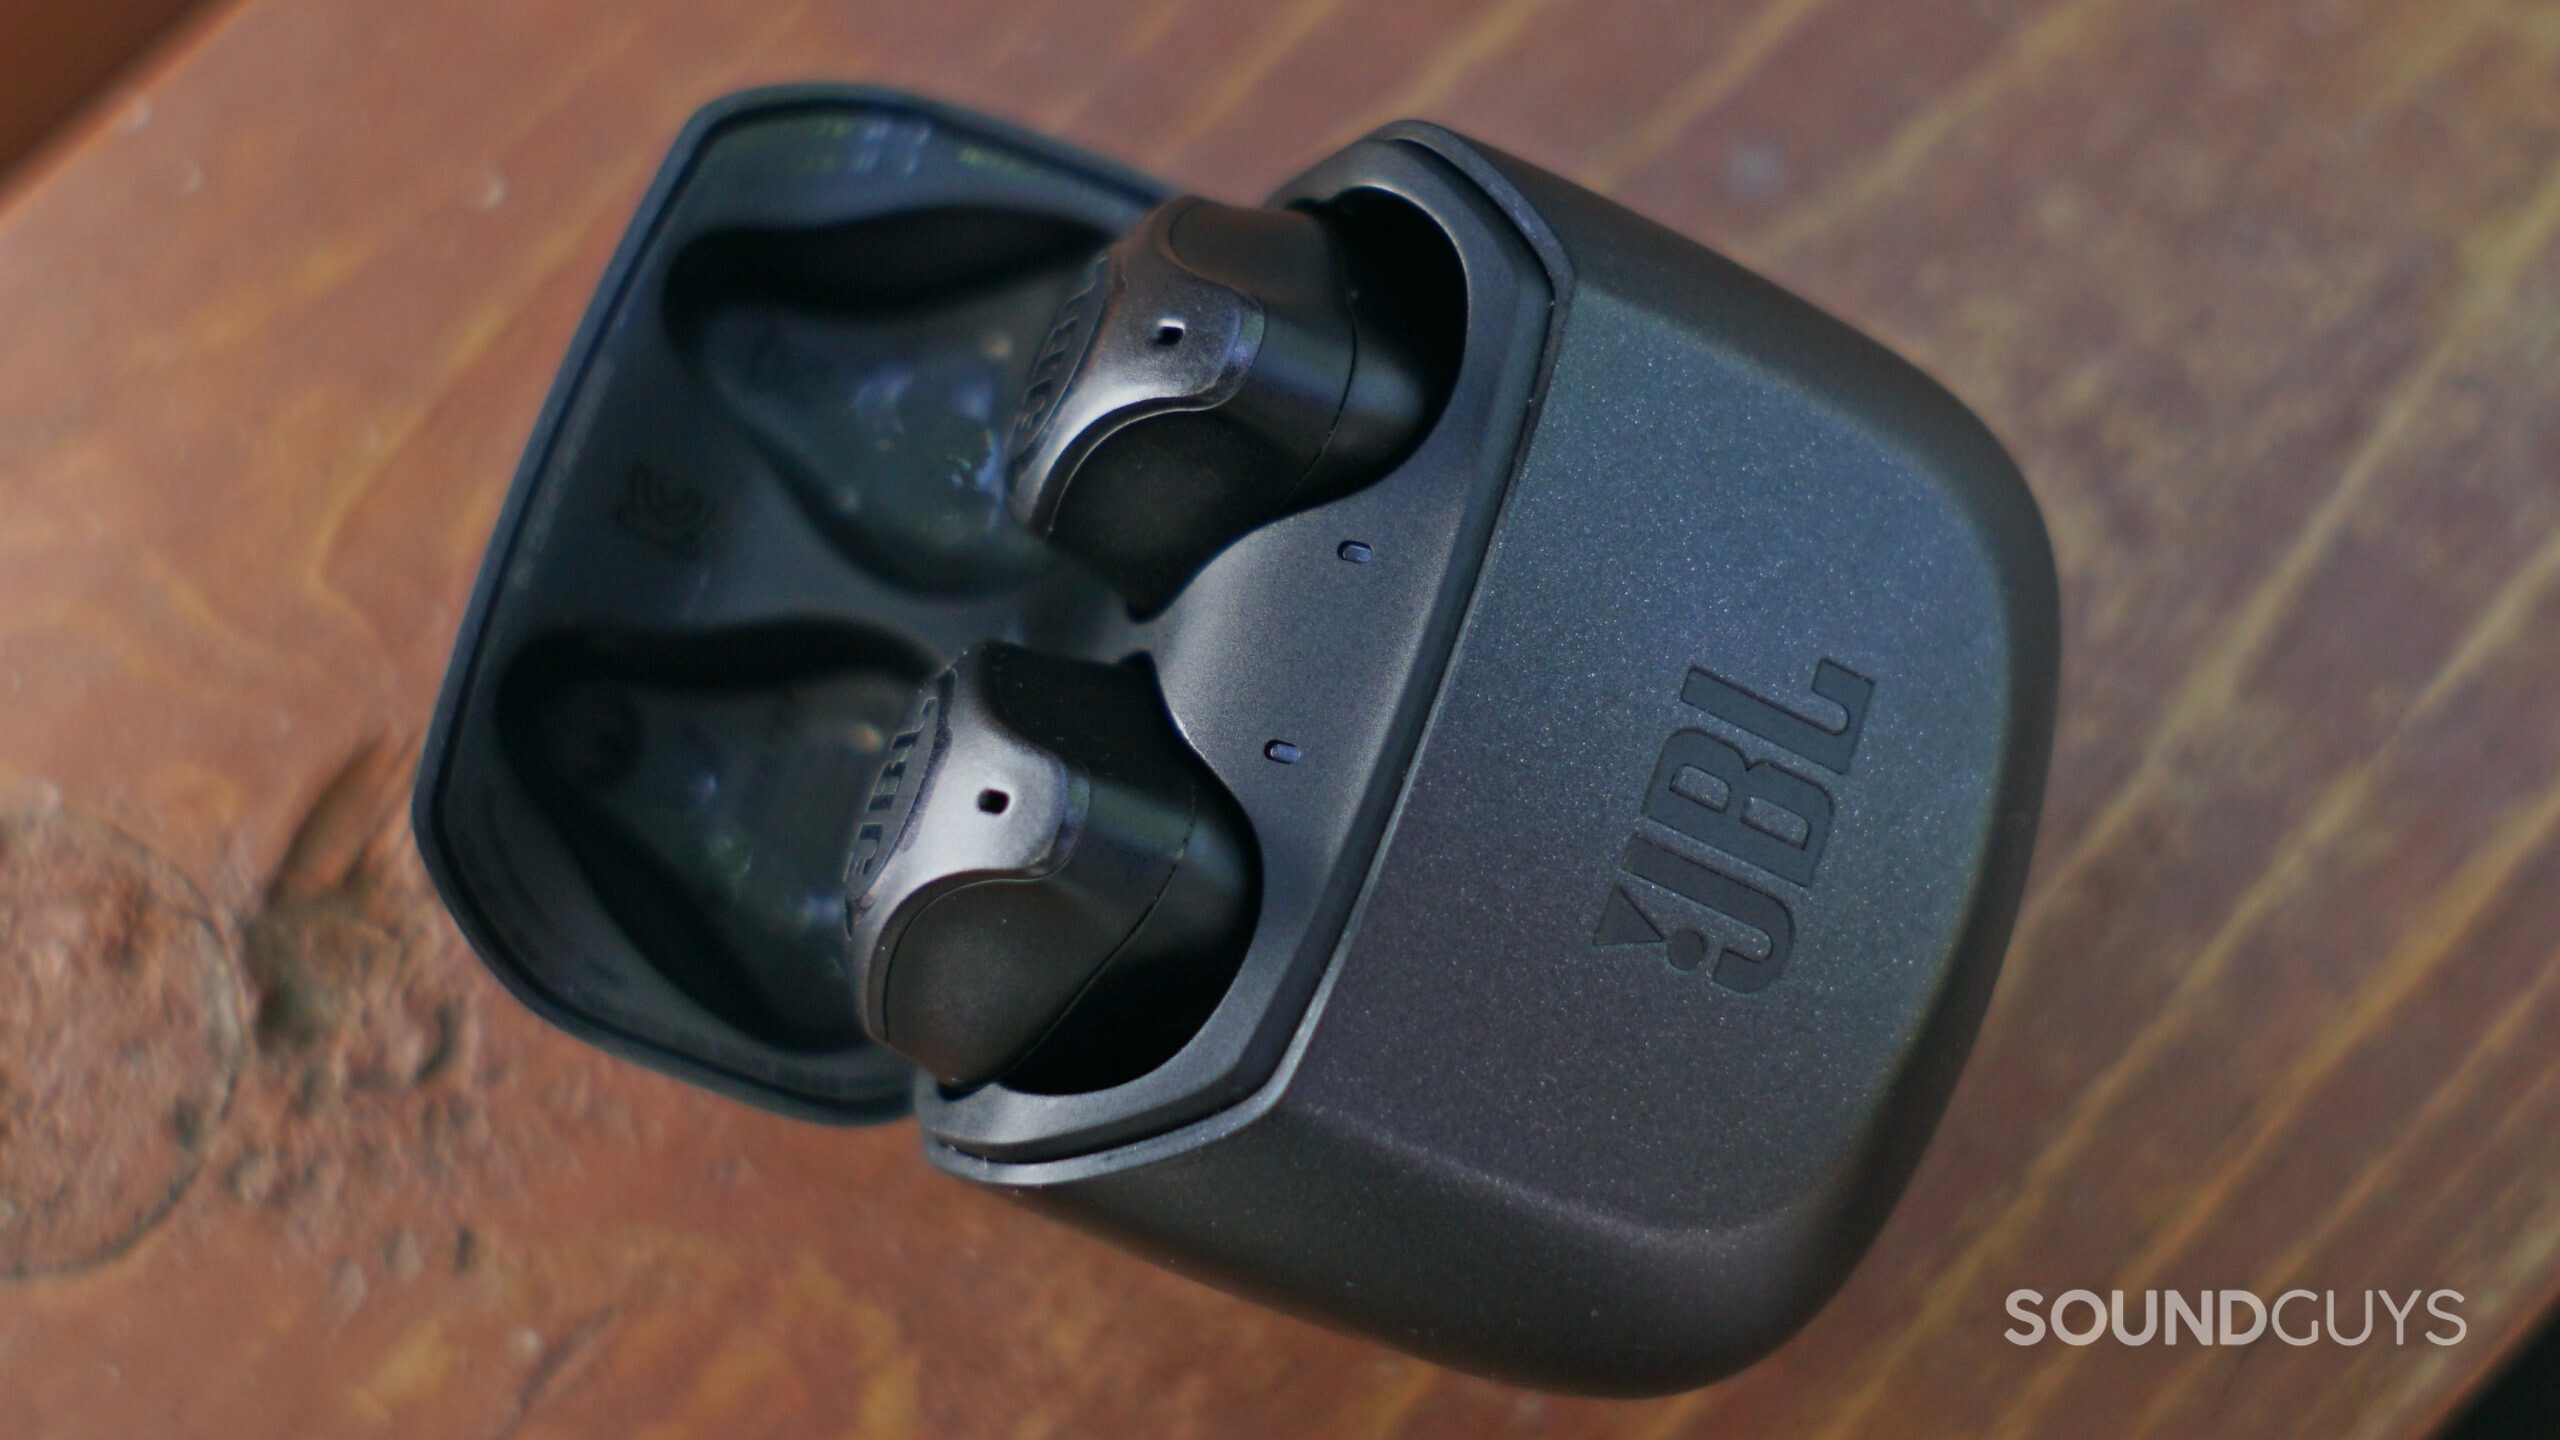 The JBL Club Pro + lays in its charging case on a wooden surface.